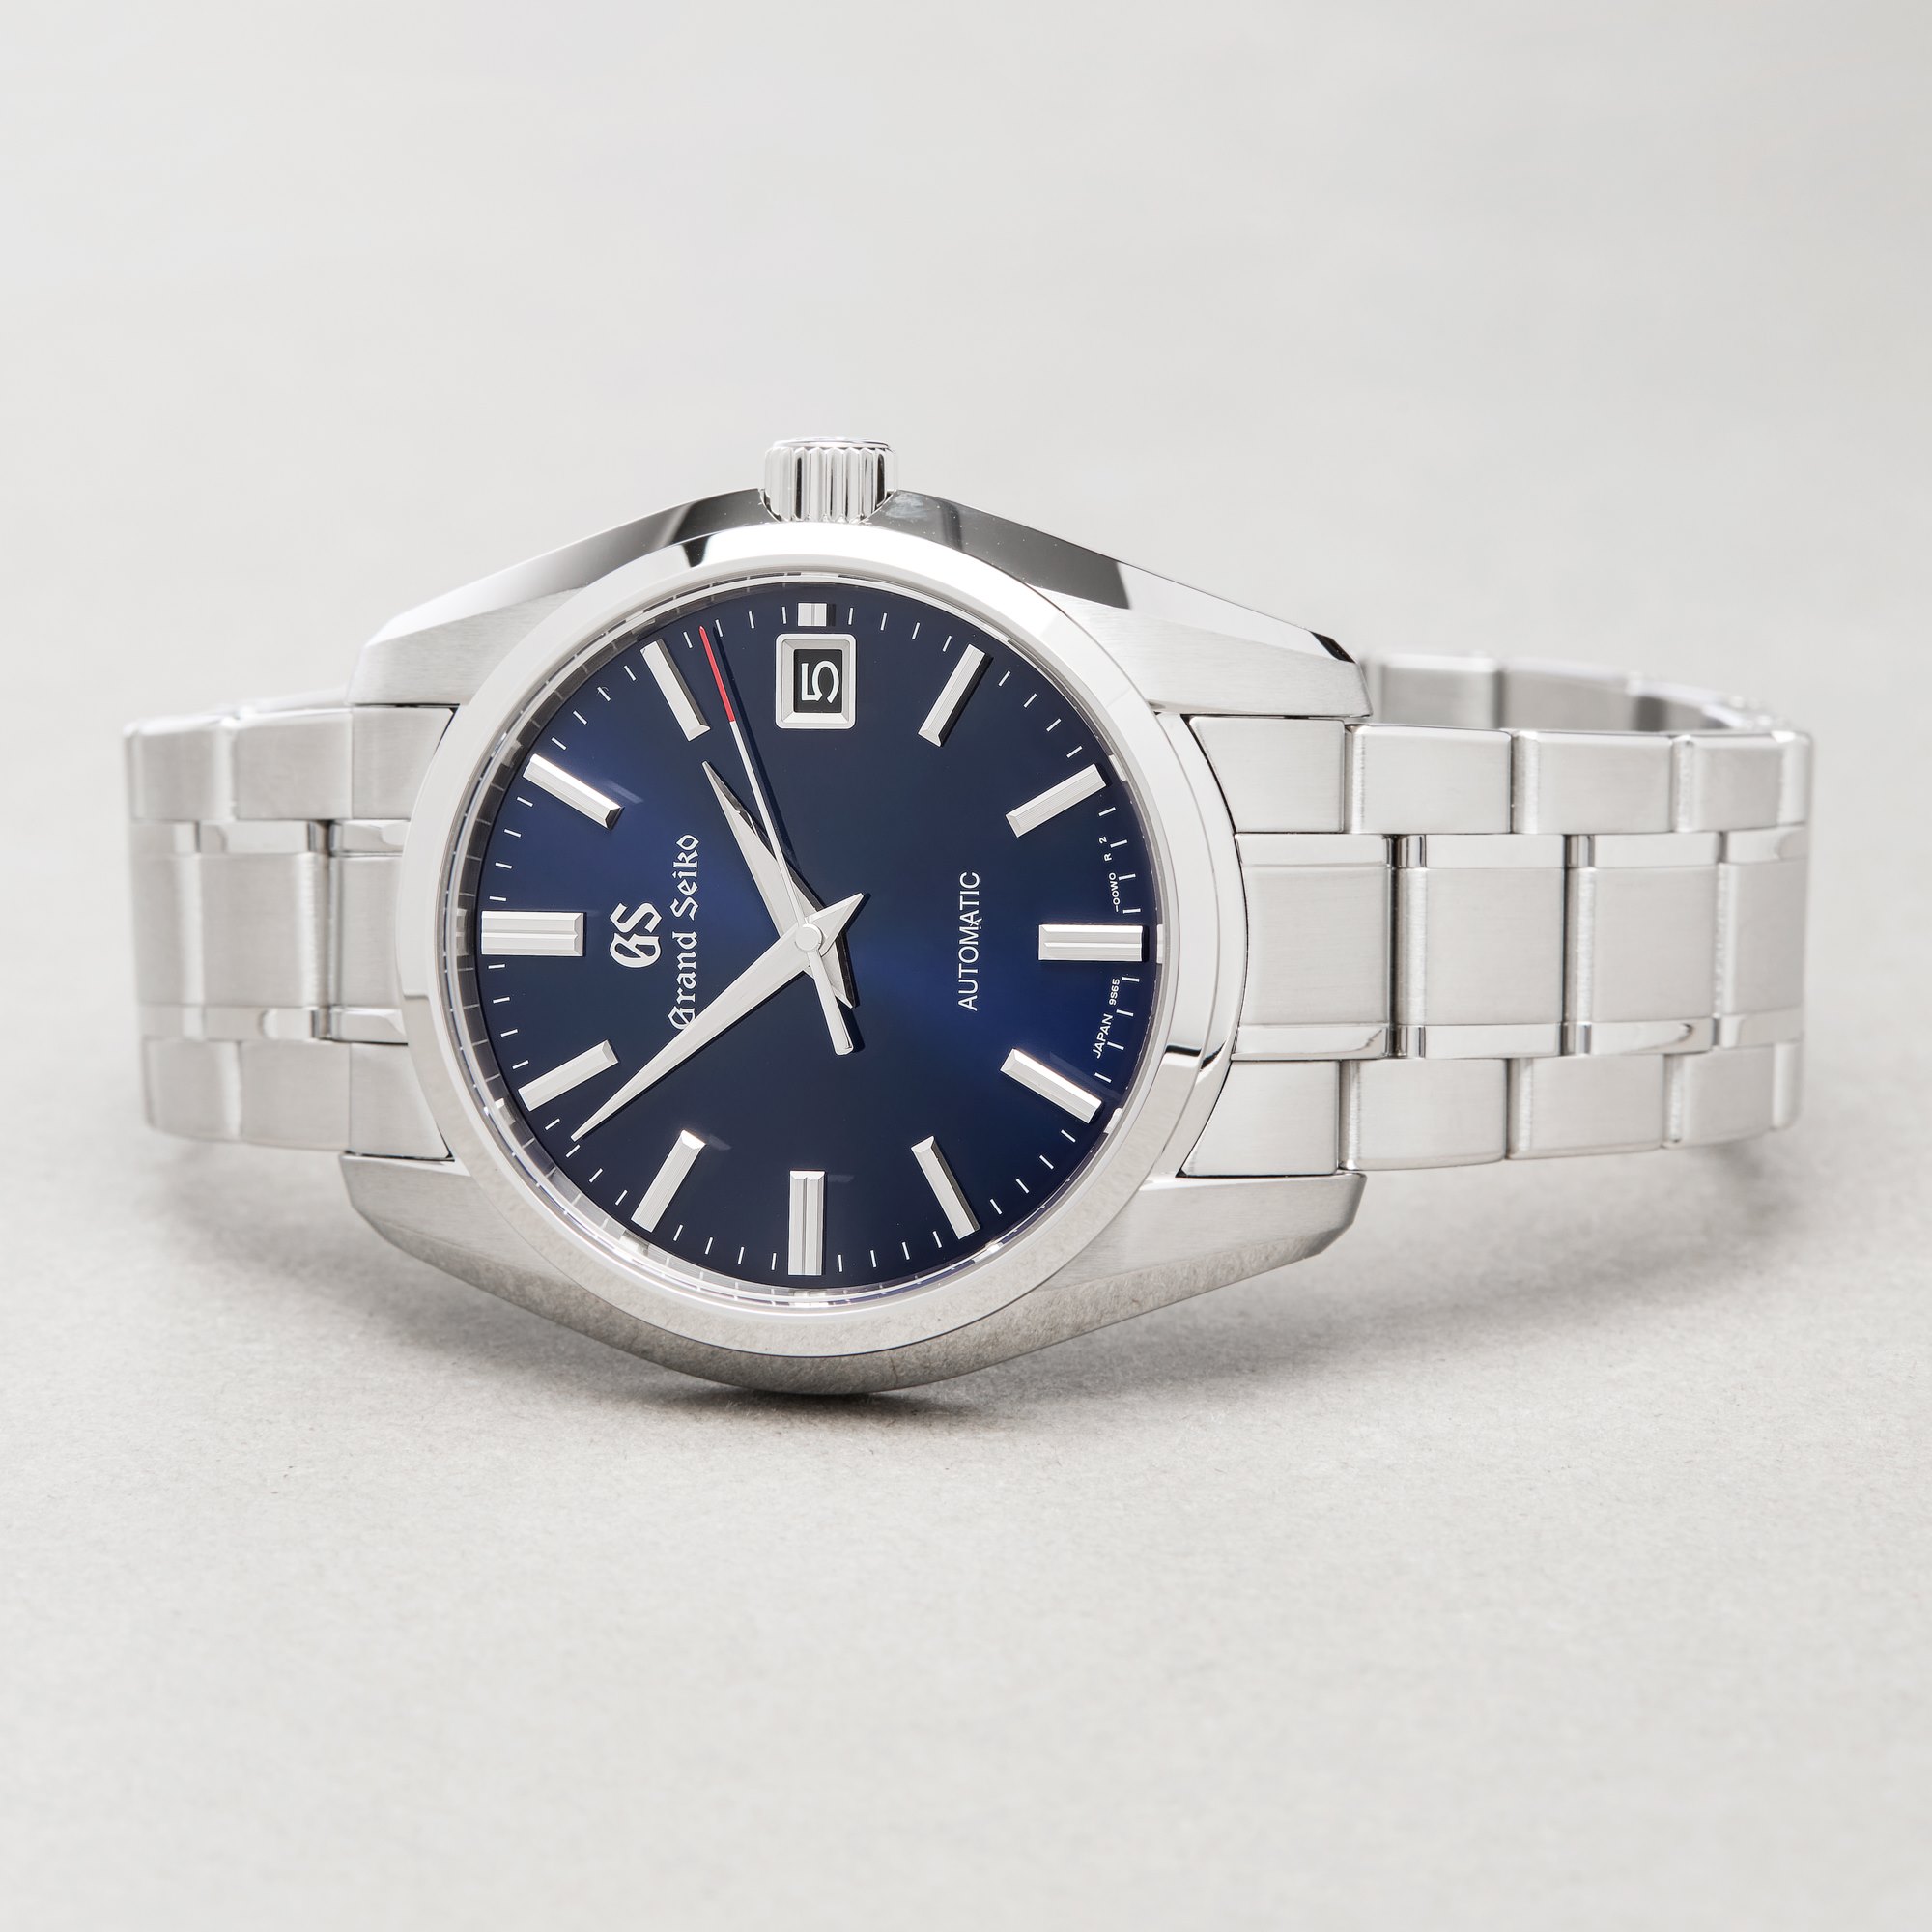 Seiko Grand Seiko Heritage 60th Anniversary Limited Edition of 2500 Pcs Stainless Steel SBGR321G